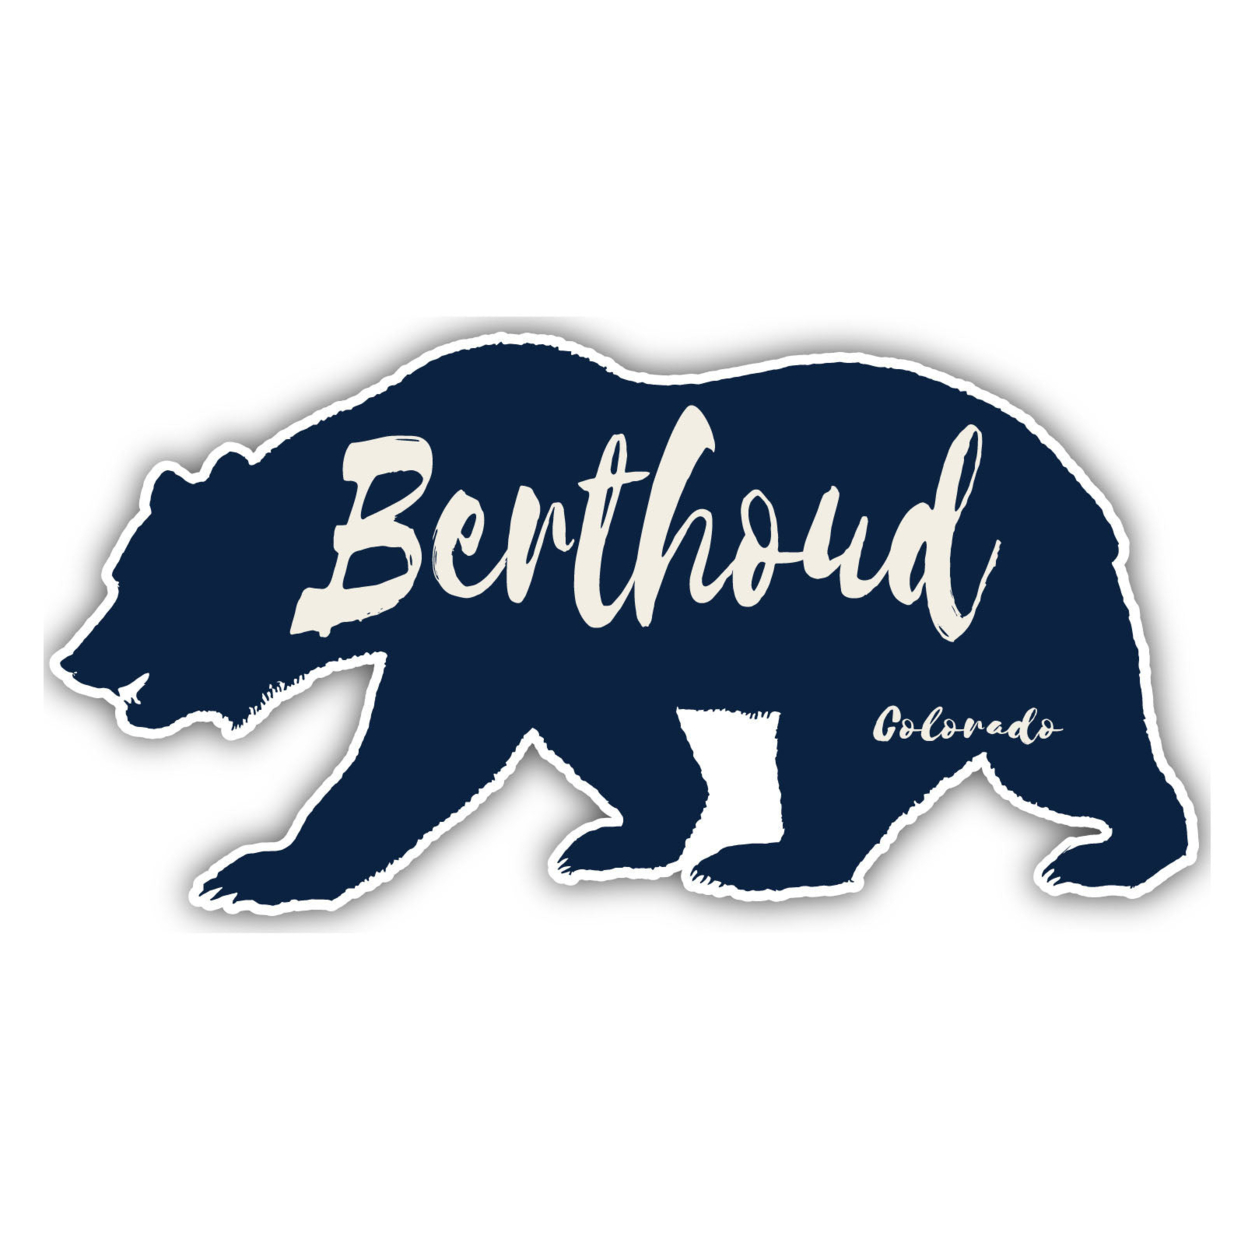 Berthoud Colorado Souvenir Decorative Stickers (Choose Theme And Size) - 4-Pack, 2-Inch, Adventures Awaits